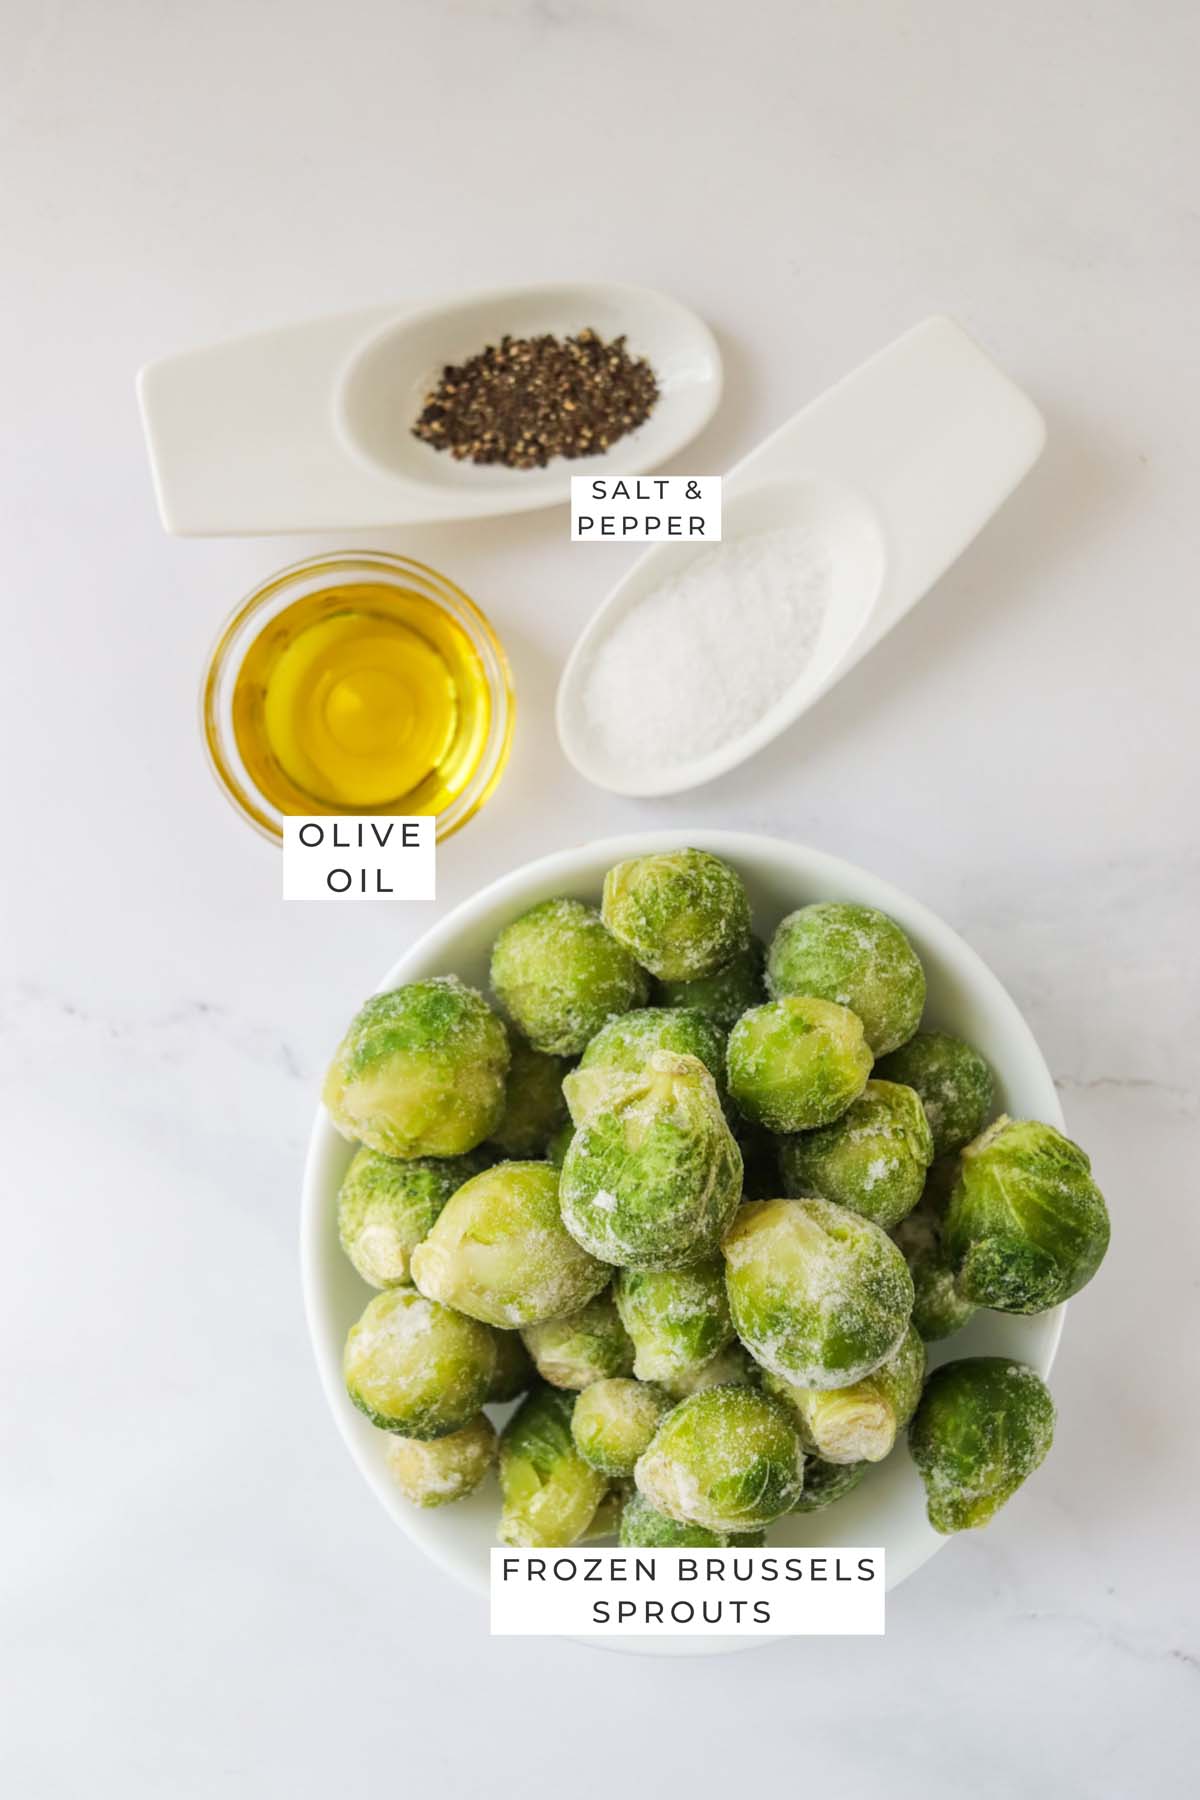 Labeled ingredients for the Brussels sprouts.